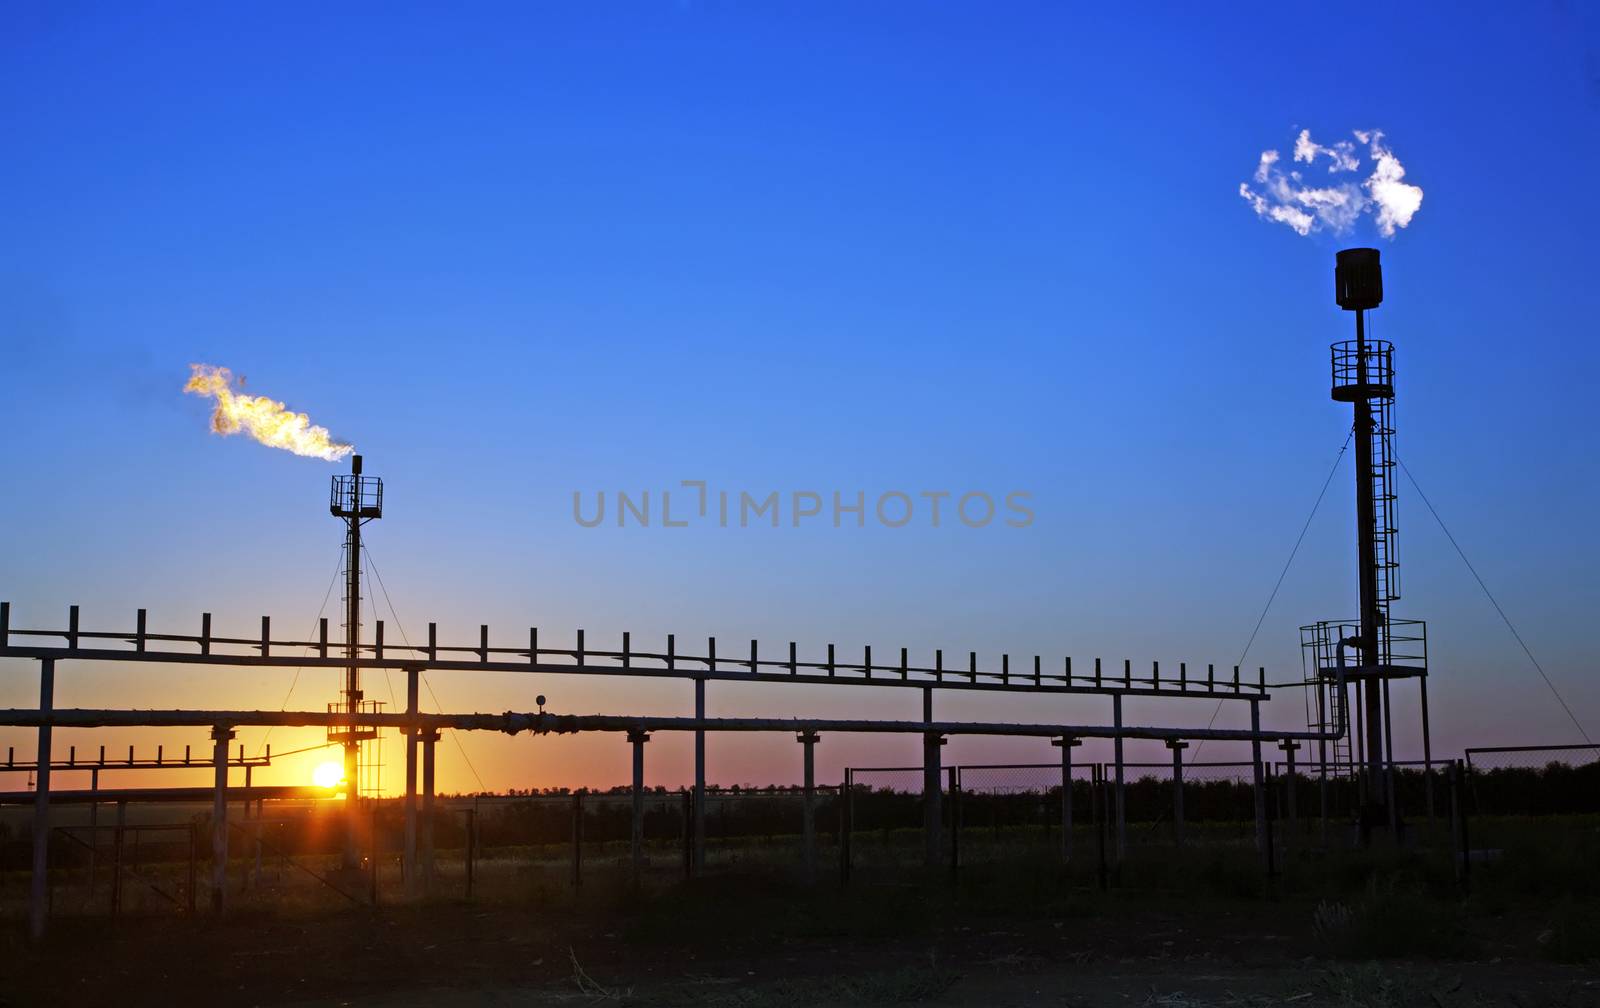 Torches for casing-head gas flaring during oil at sunset